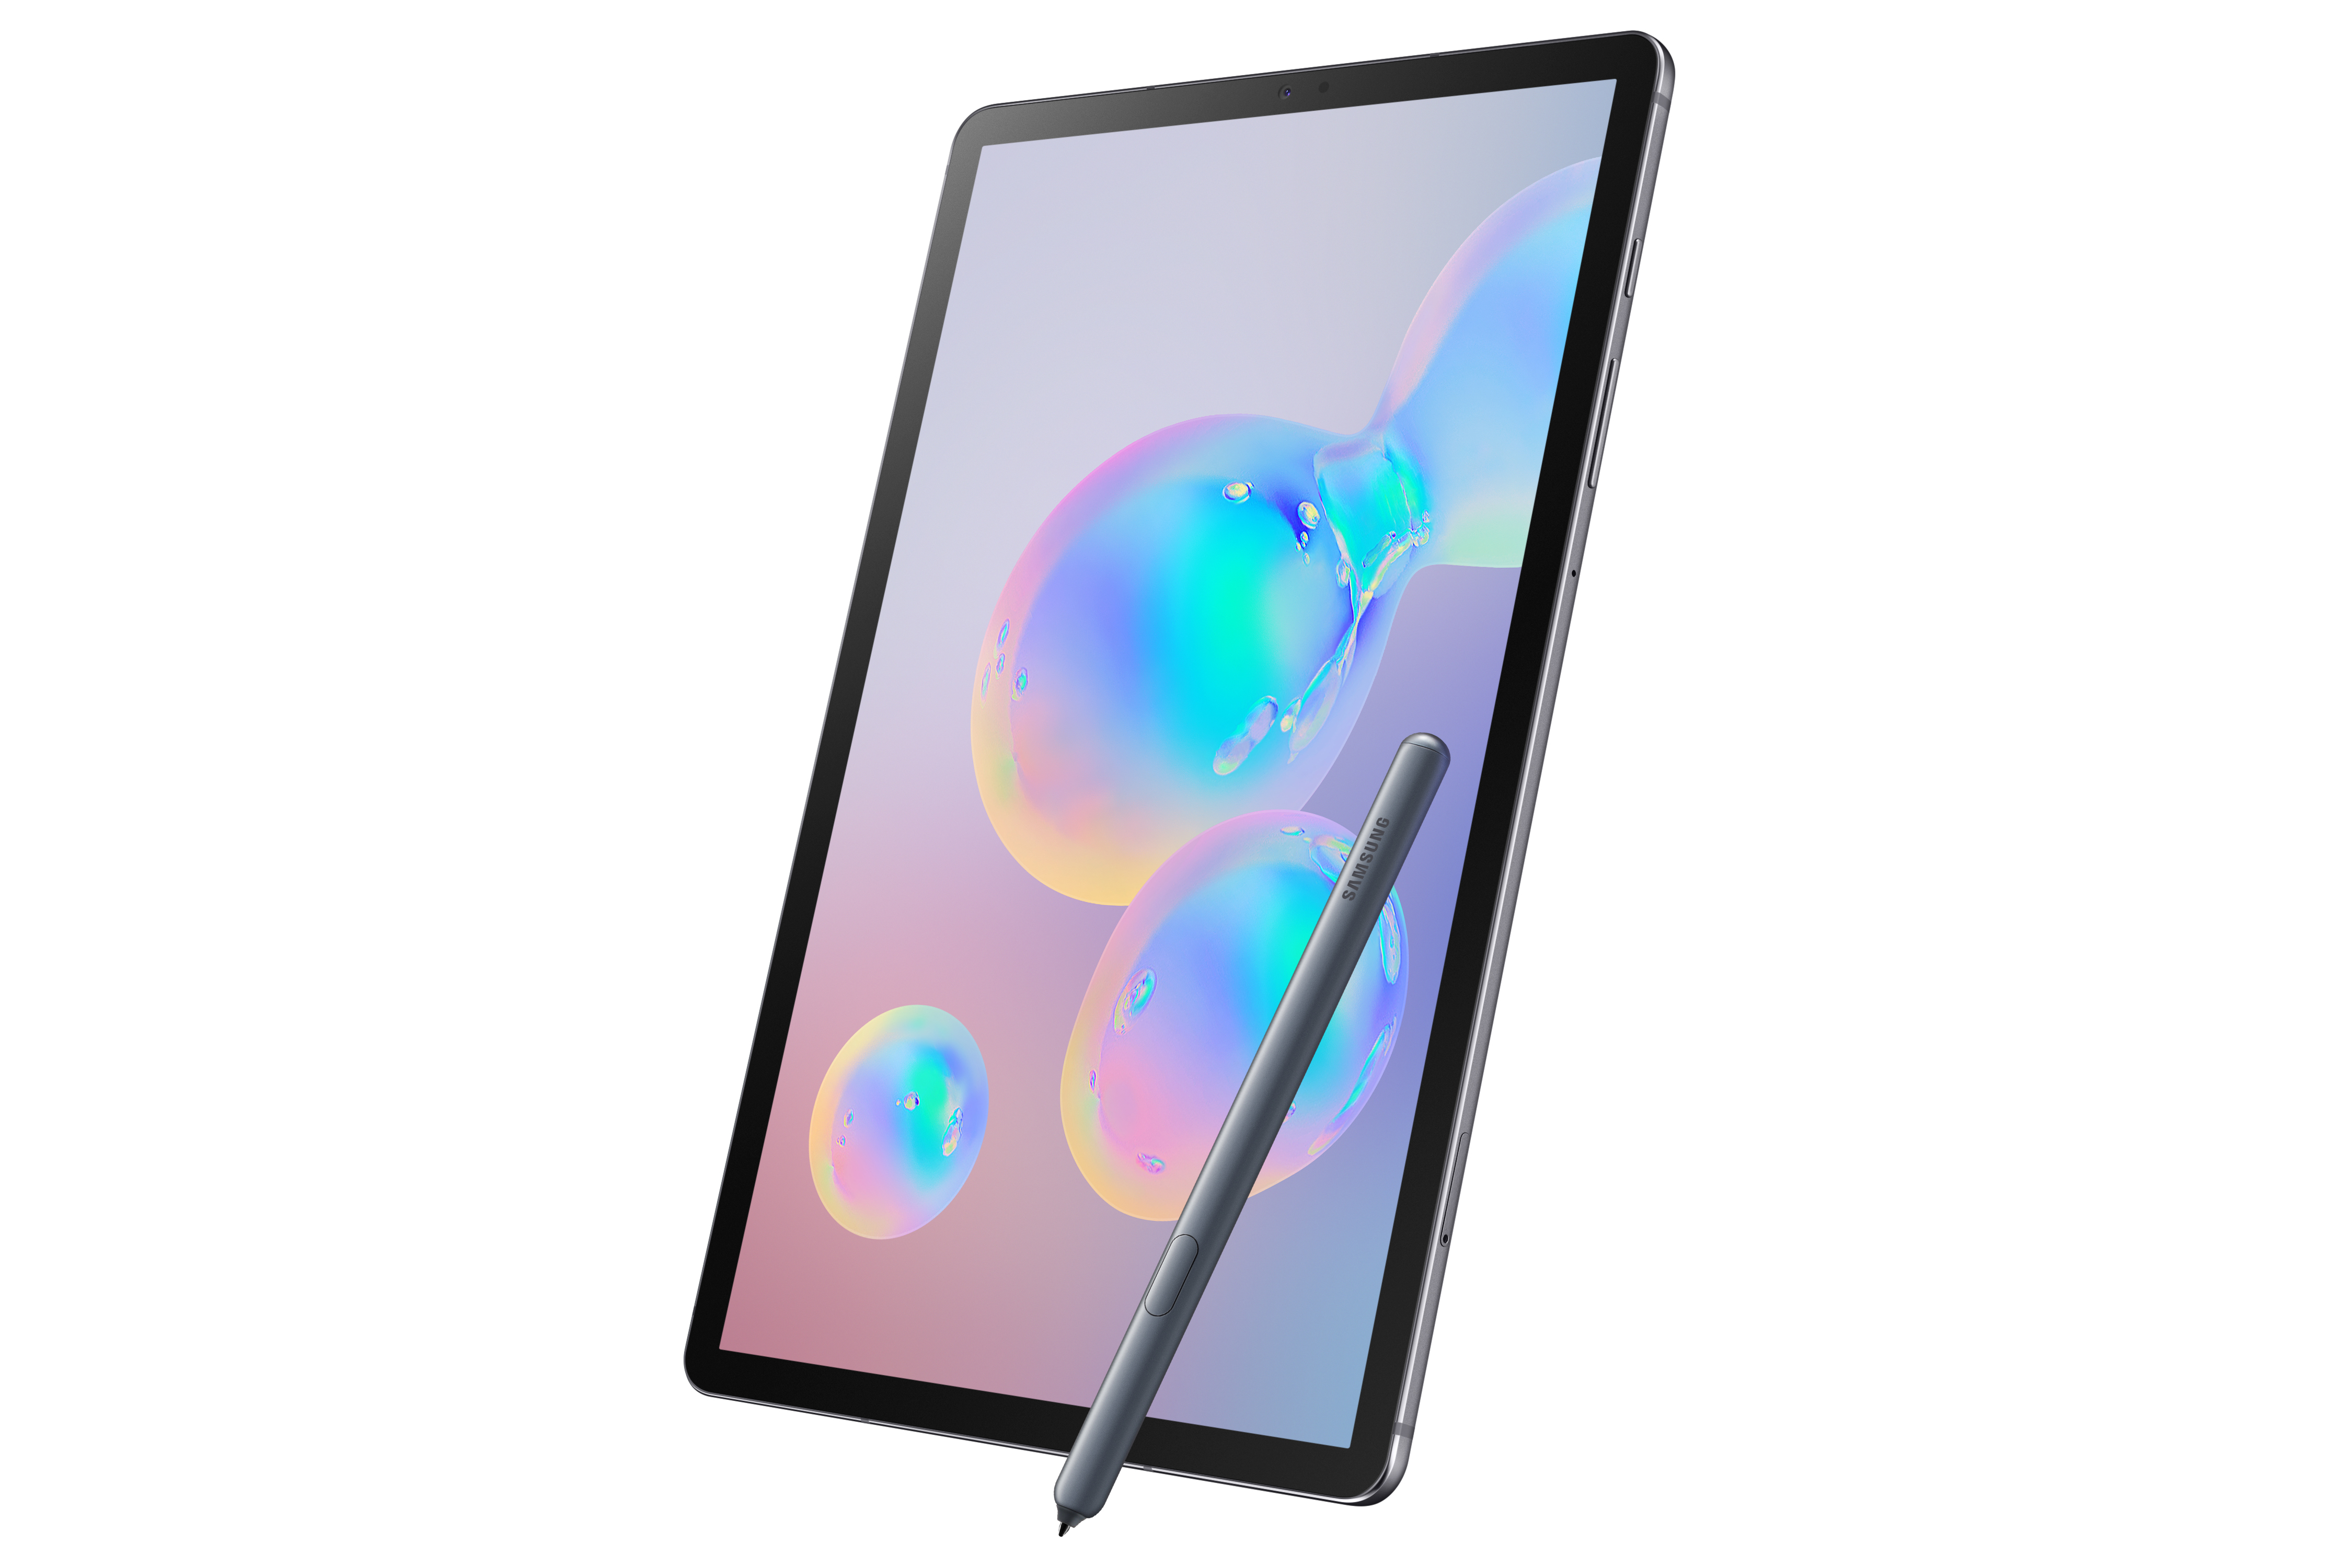 Galaxy Tab S6: Samsung's new tablet flagship for the first